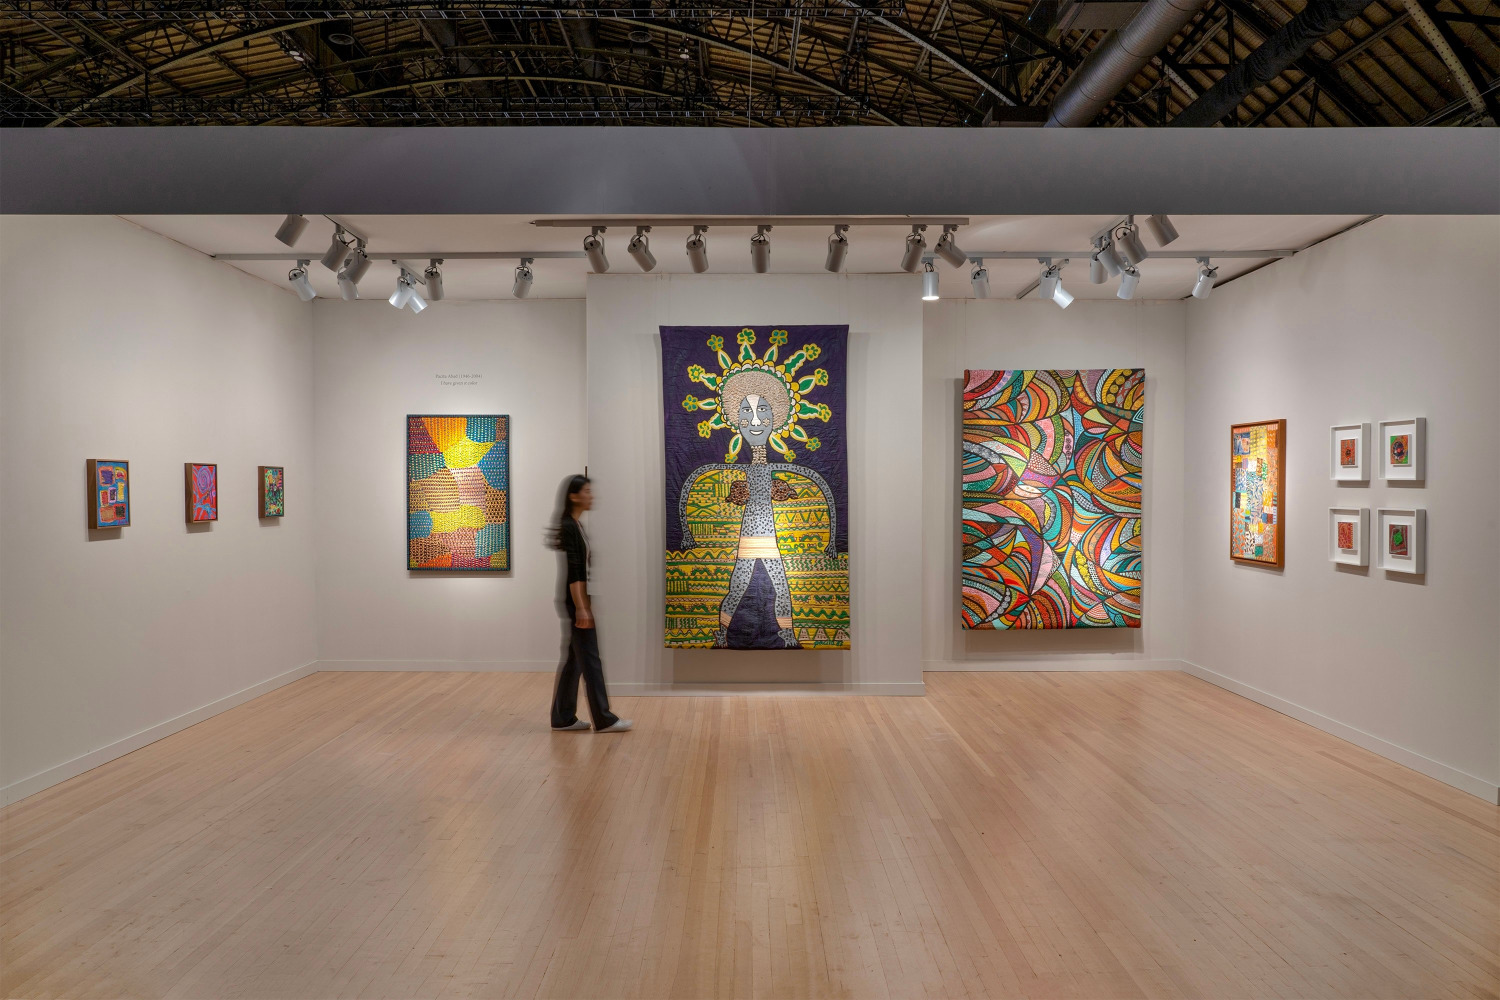 Installation view of ADAA | The Art Show 2022 (Booth C1) at Park Avenue Armory. Image courtesy of&amp;nbsp;the Pacita Abad Art Estate and Tina Kim Gallery.&amp;nbsp;Photo by Hyunjung Rhee.